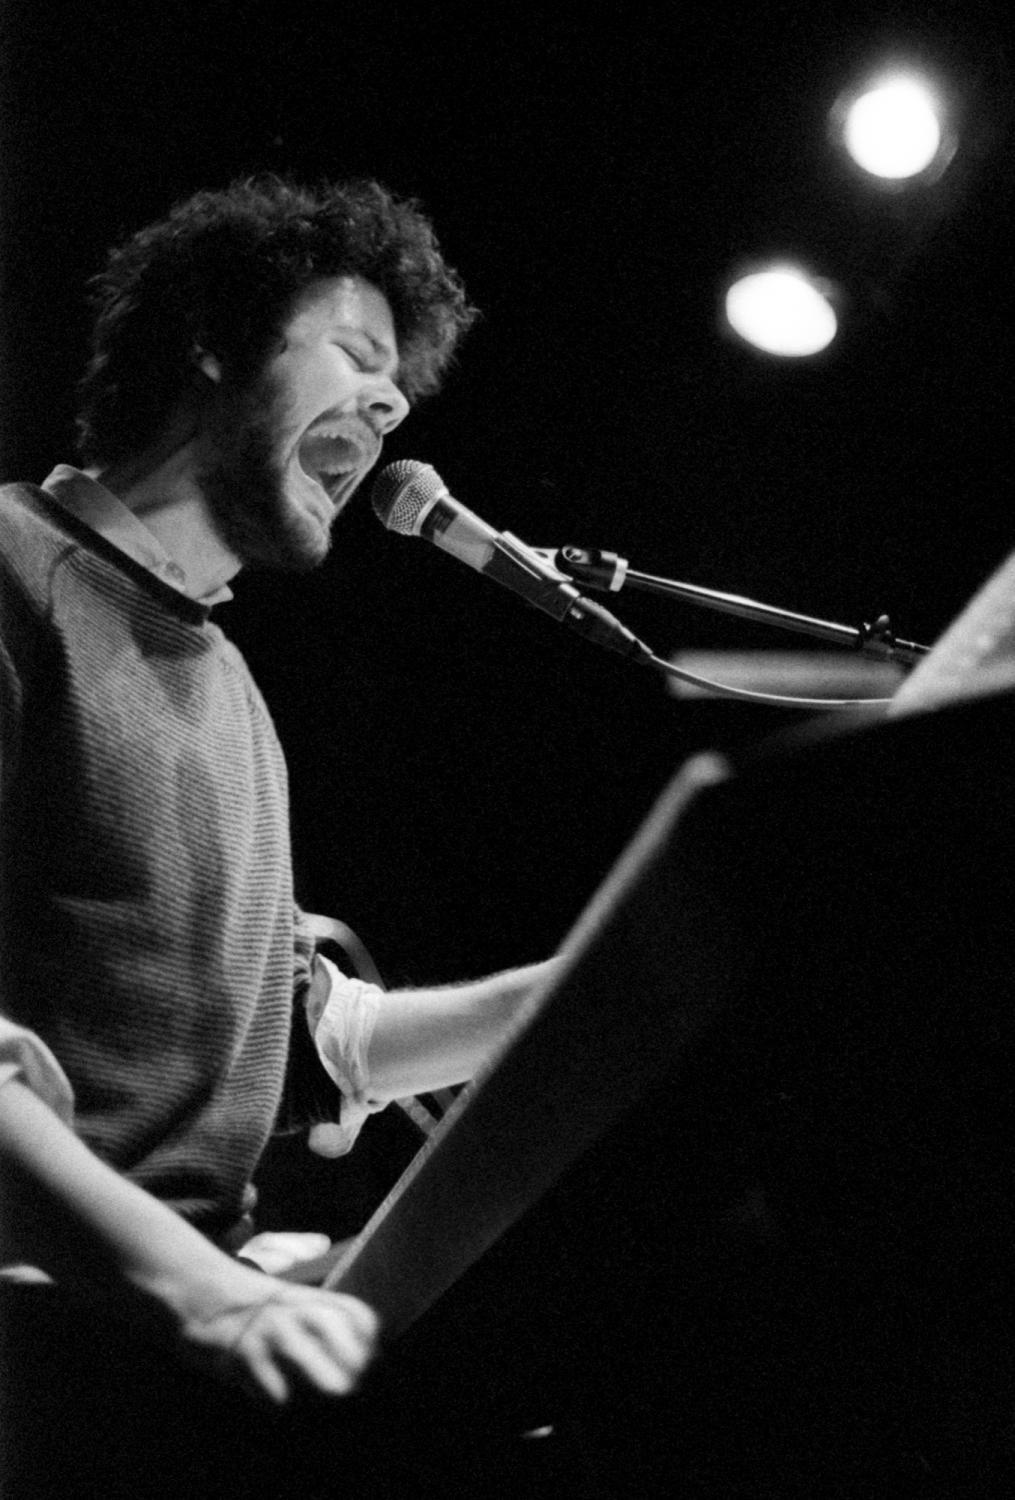 Michael Angelakos, Passion Pit Frontman performing at the Great Scott venue in Allston Massachusetts. This was just on the heels of their first album &quot;Manners,&quot; when usually steel-footed Boston indie crowds were bending the floorboards from their collective energy.